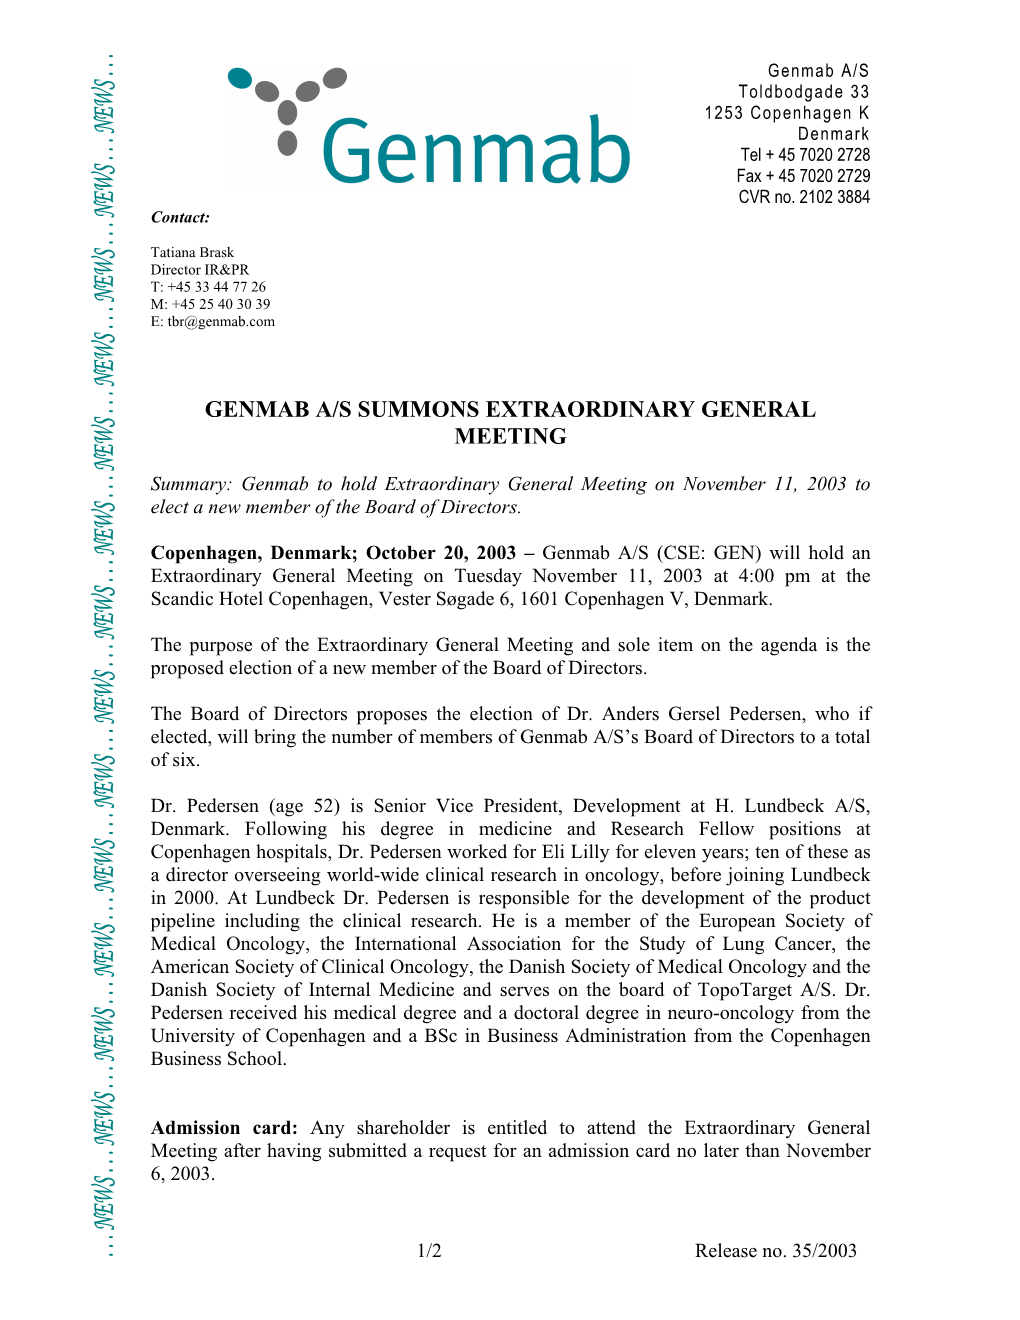 Genmab A/S Summons Extraordinary General Meeting